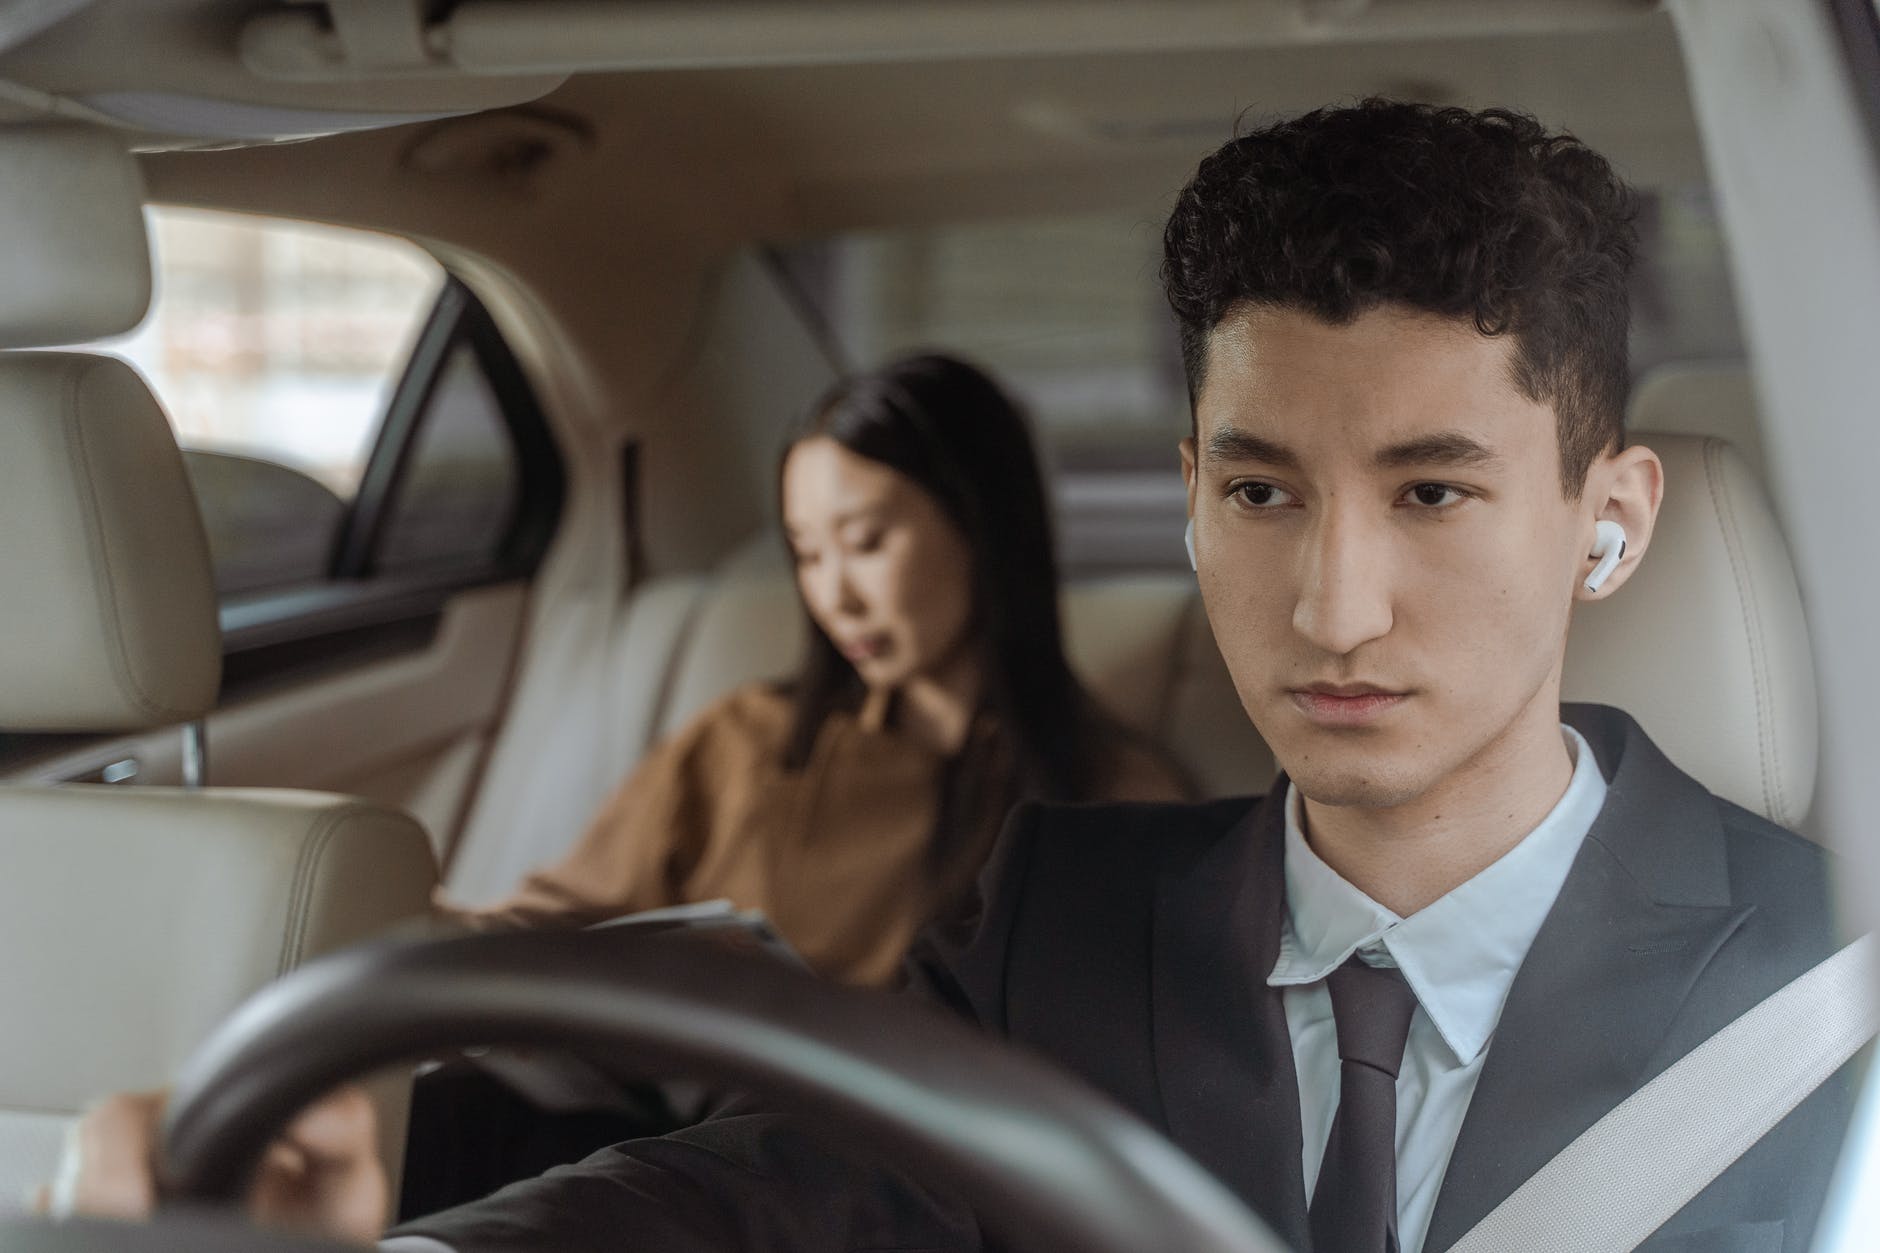 Driver in a tux with Female Passenger